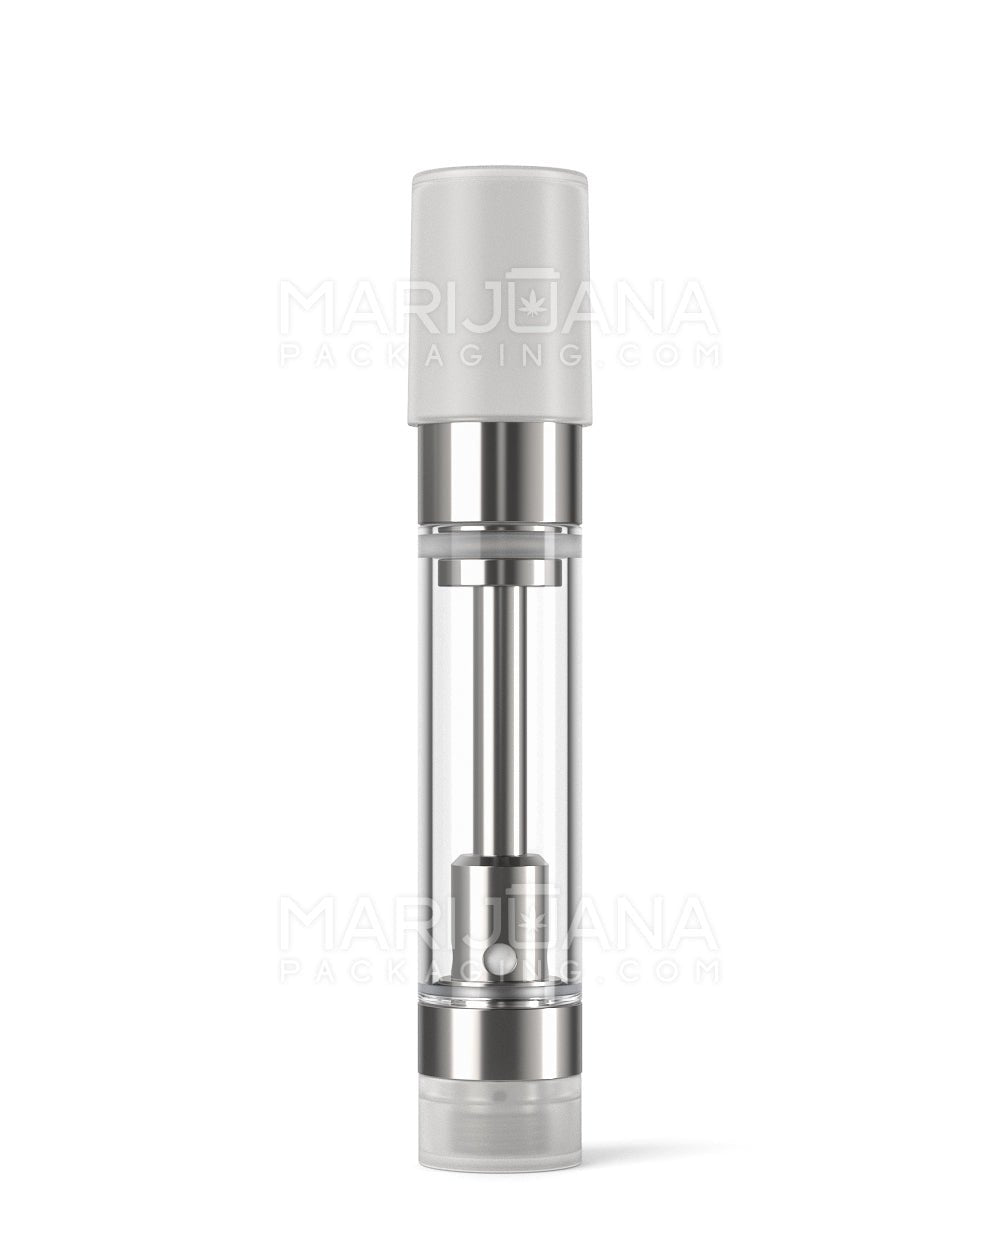 Ceramic Core Glass Vape Cartridge with Round White Plastic Mouthpiece | 1mL - Press On - 100 Count - 9